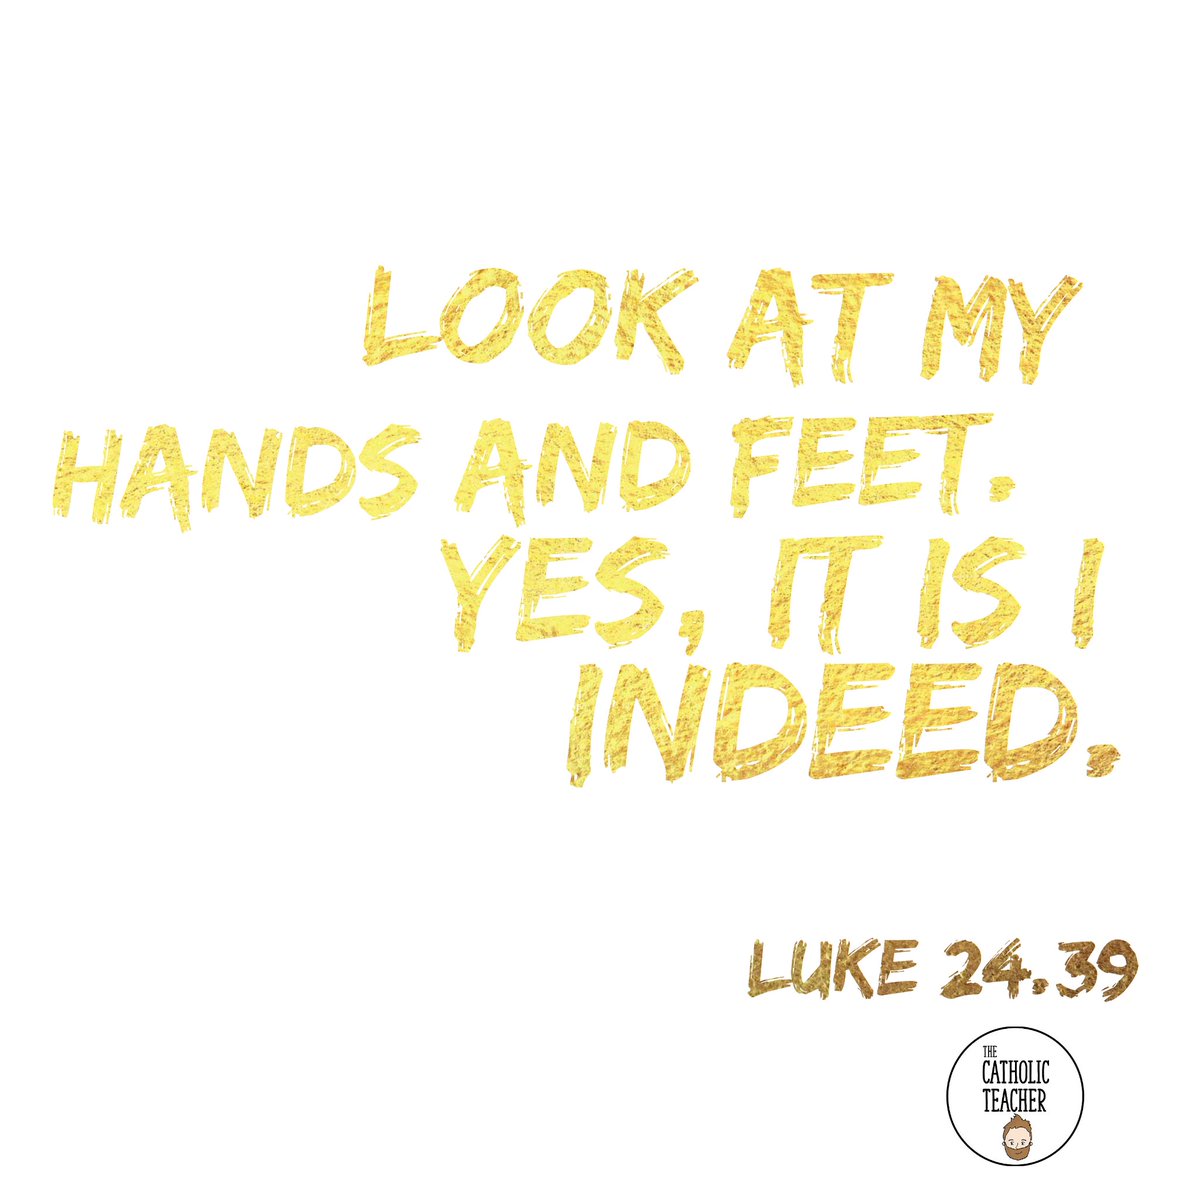 Our Easter celebrations continue as we hear about another appearance by Jesus in today's Gospel.. The significance of the hands and feet is to show the wounds where Jesus was nailed to the cross.. He appears to them now in His glorified body.

#easter #thecatholicteacher